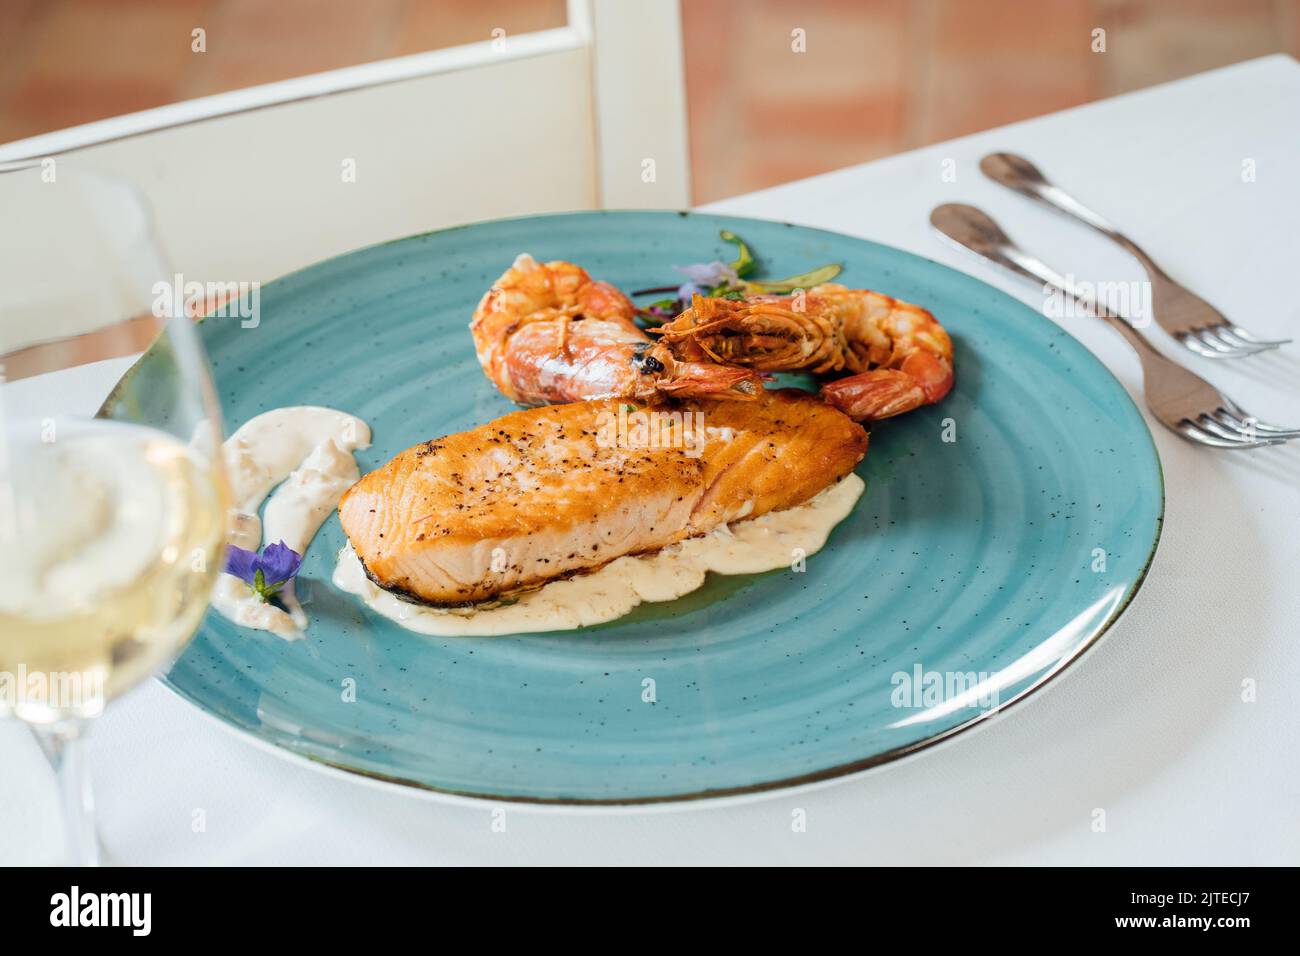 The high-angle view of grilled salmon and shrimp served on the blue plate Stock Photo